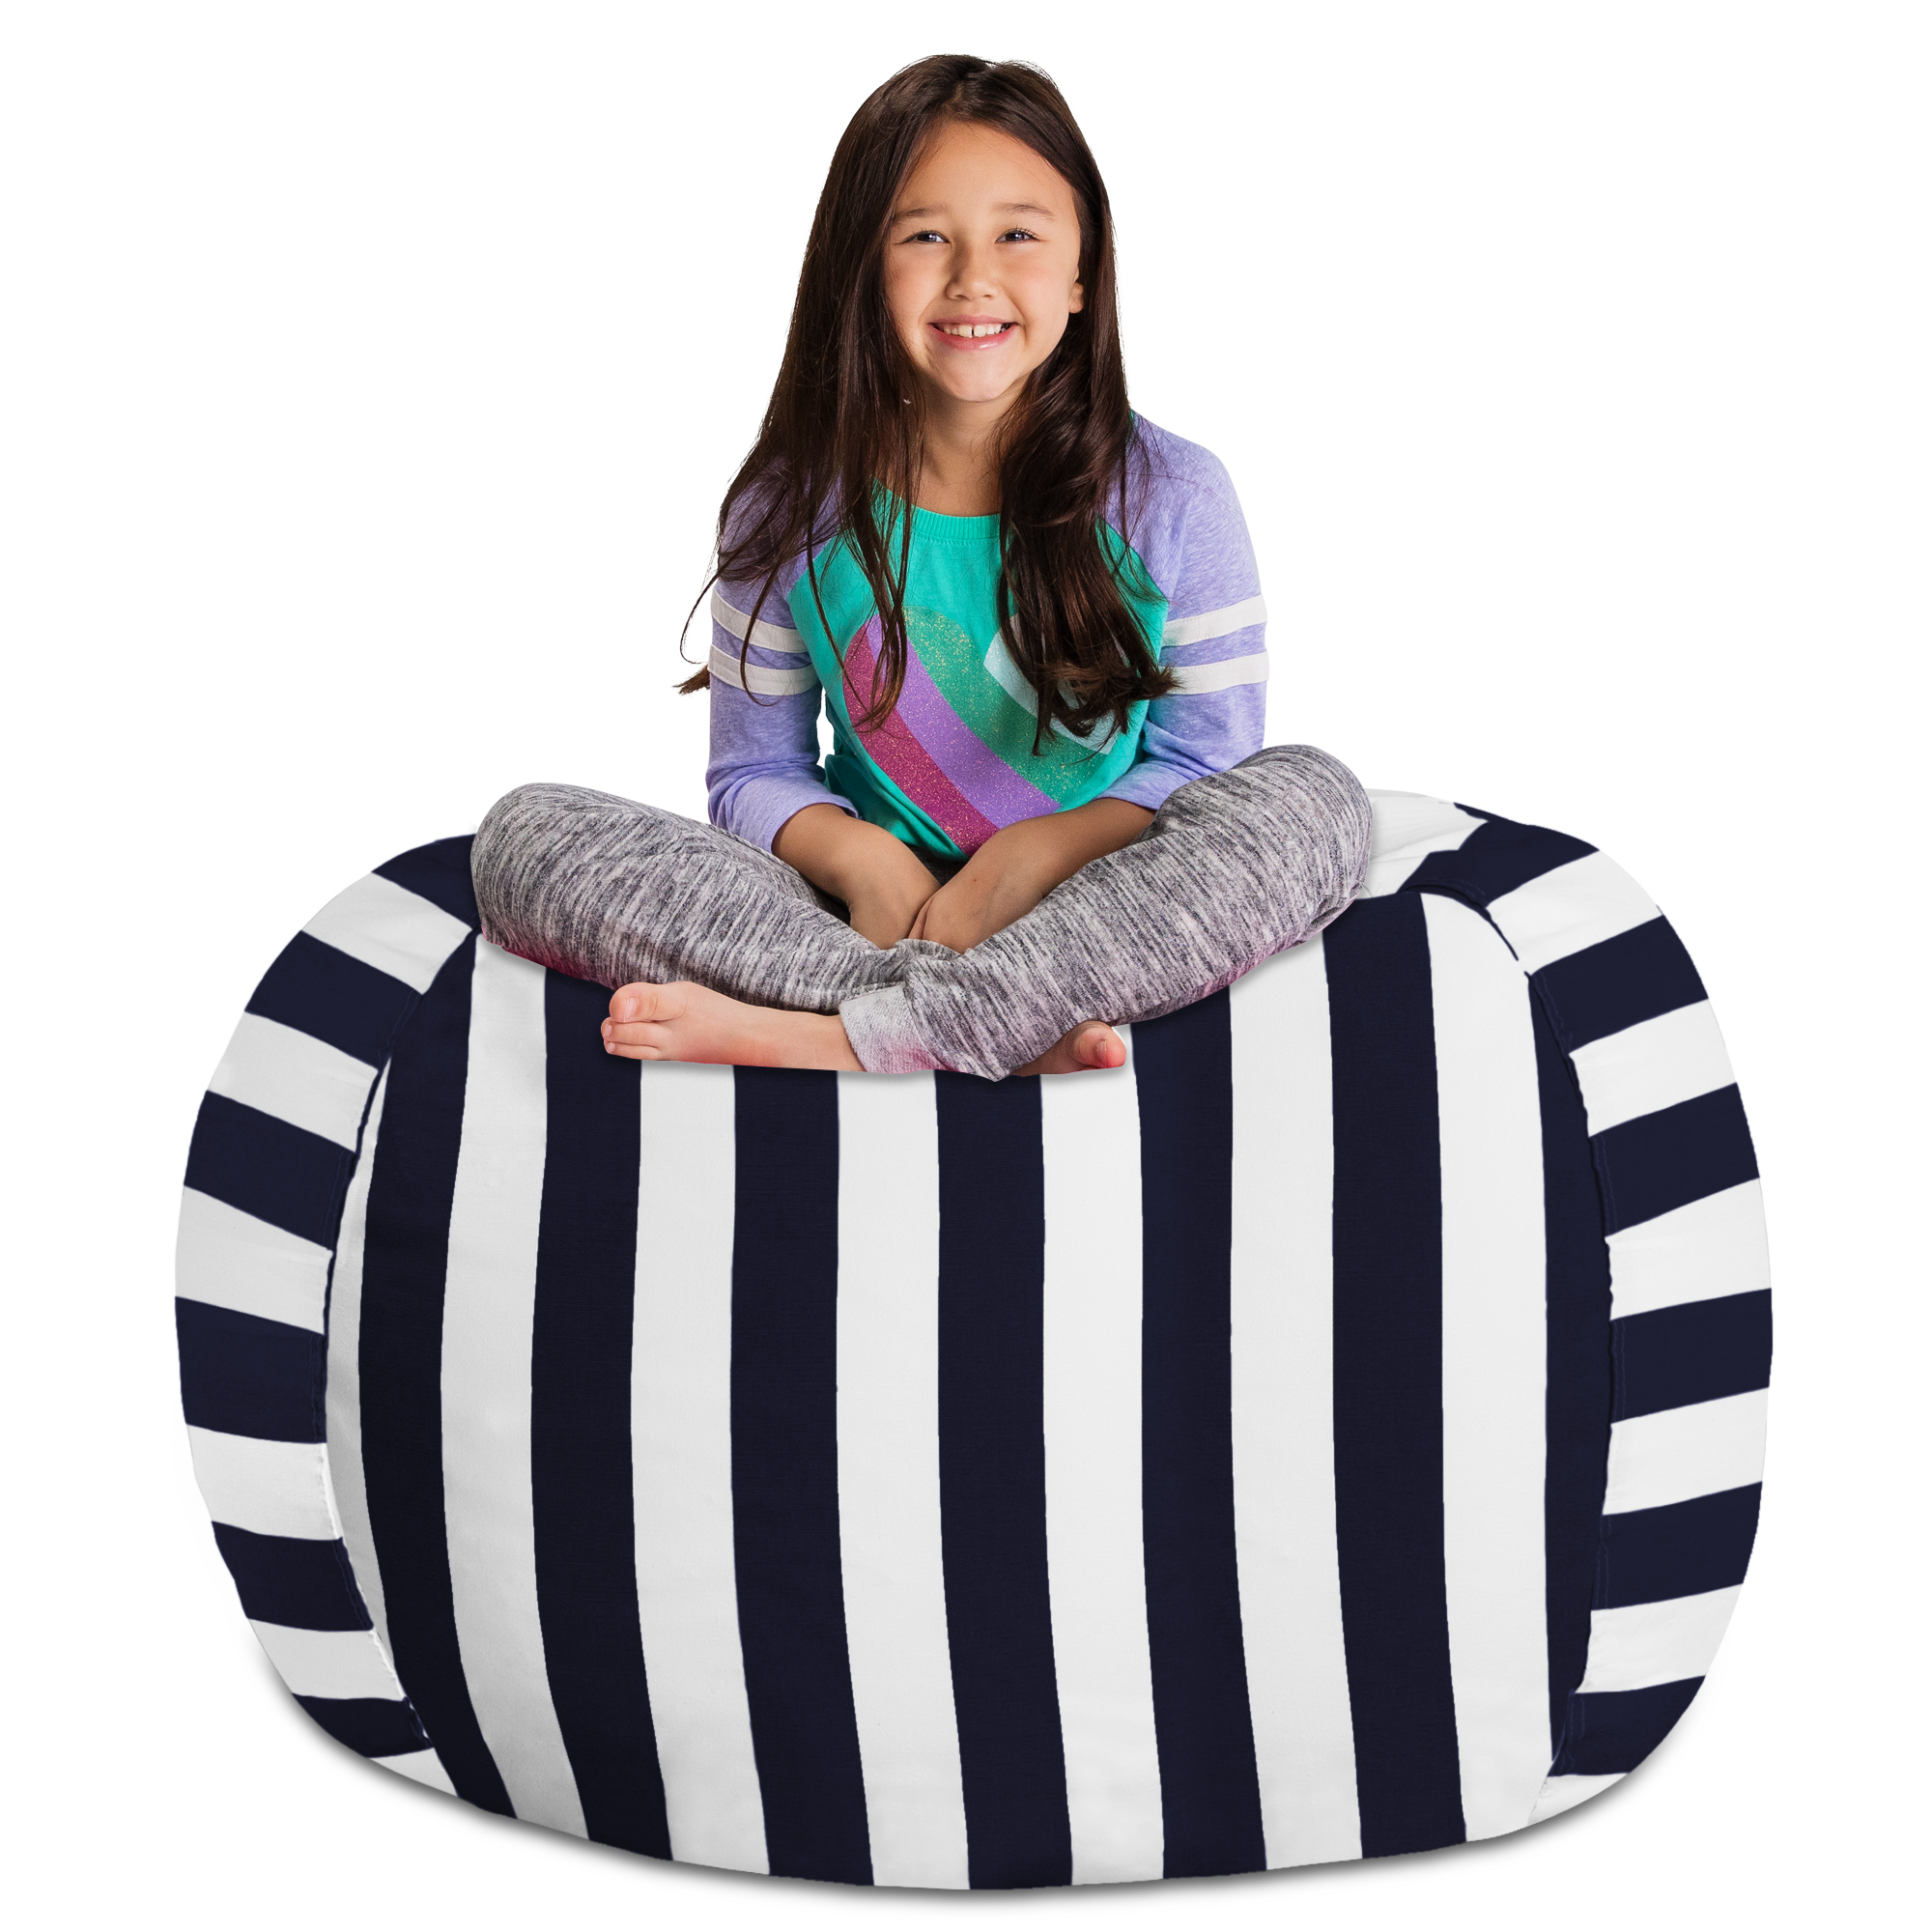 Posh Stuffable Kids Stuffed Animal Storage Bean Bag Chair Cover Childrens Toy Organizer X-Large-48in Sports Basketball